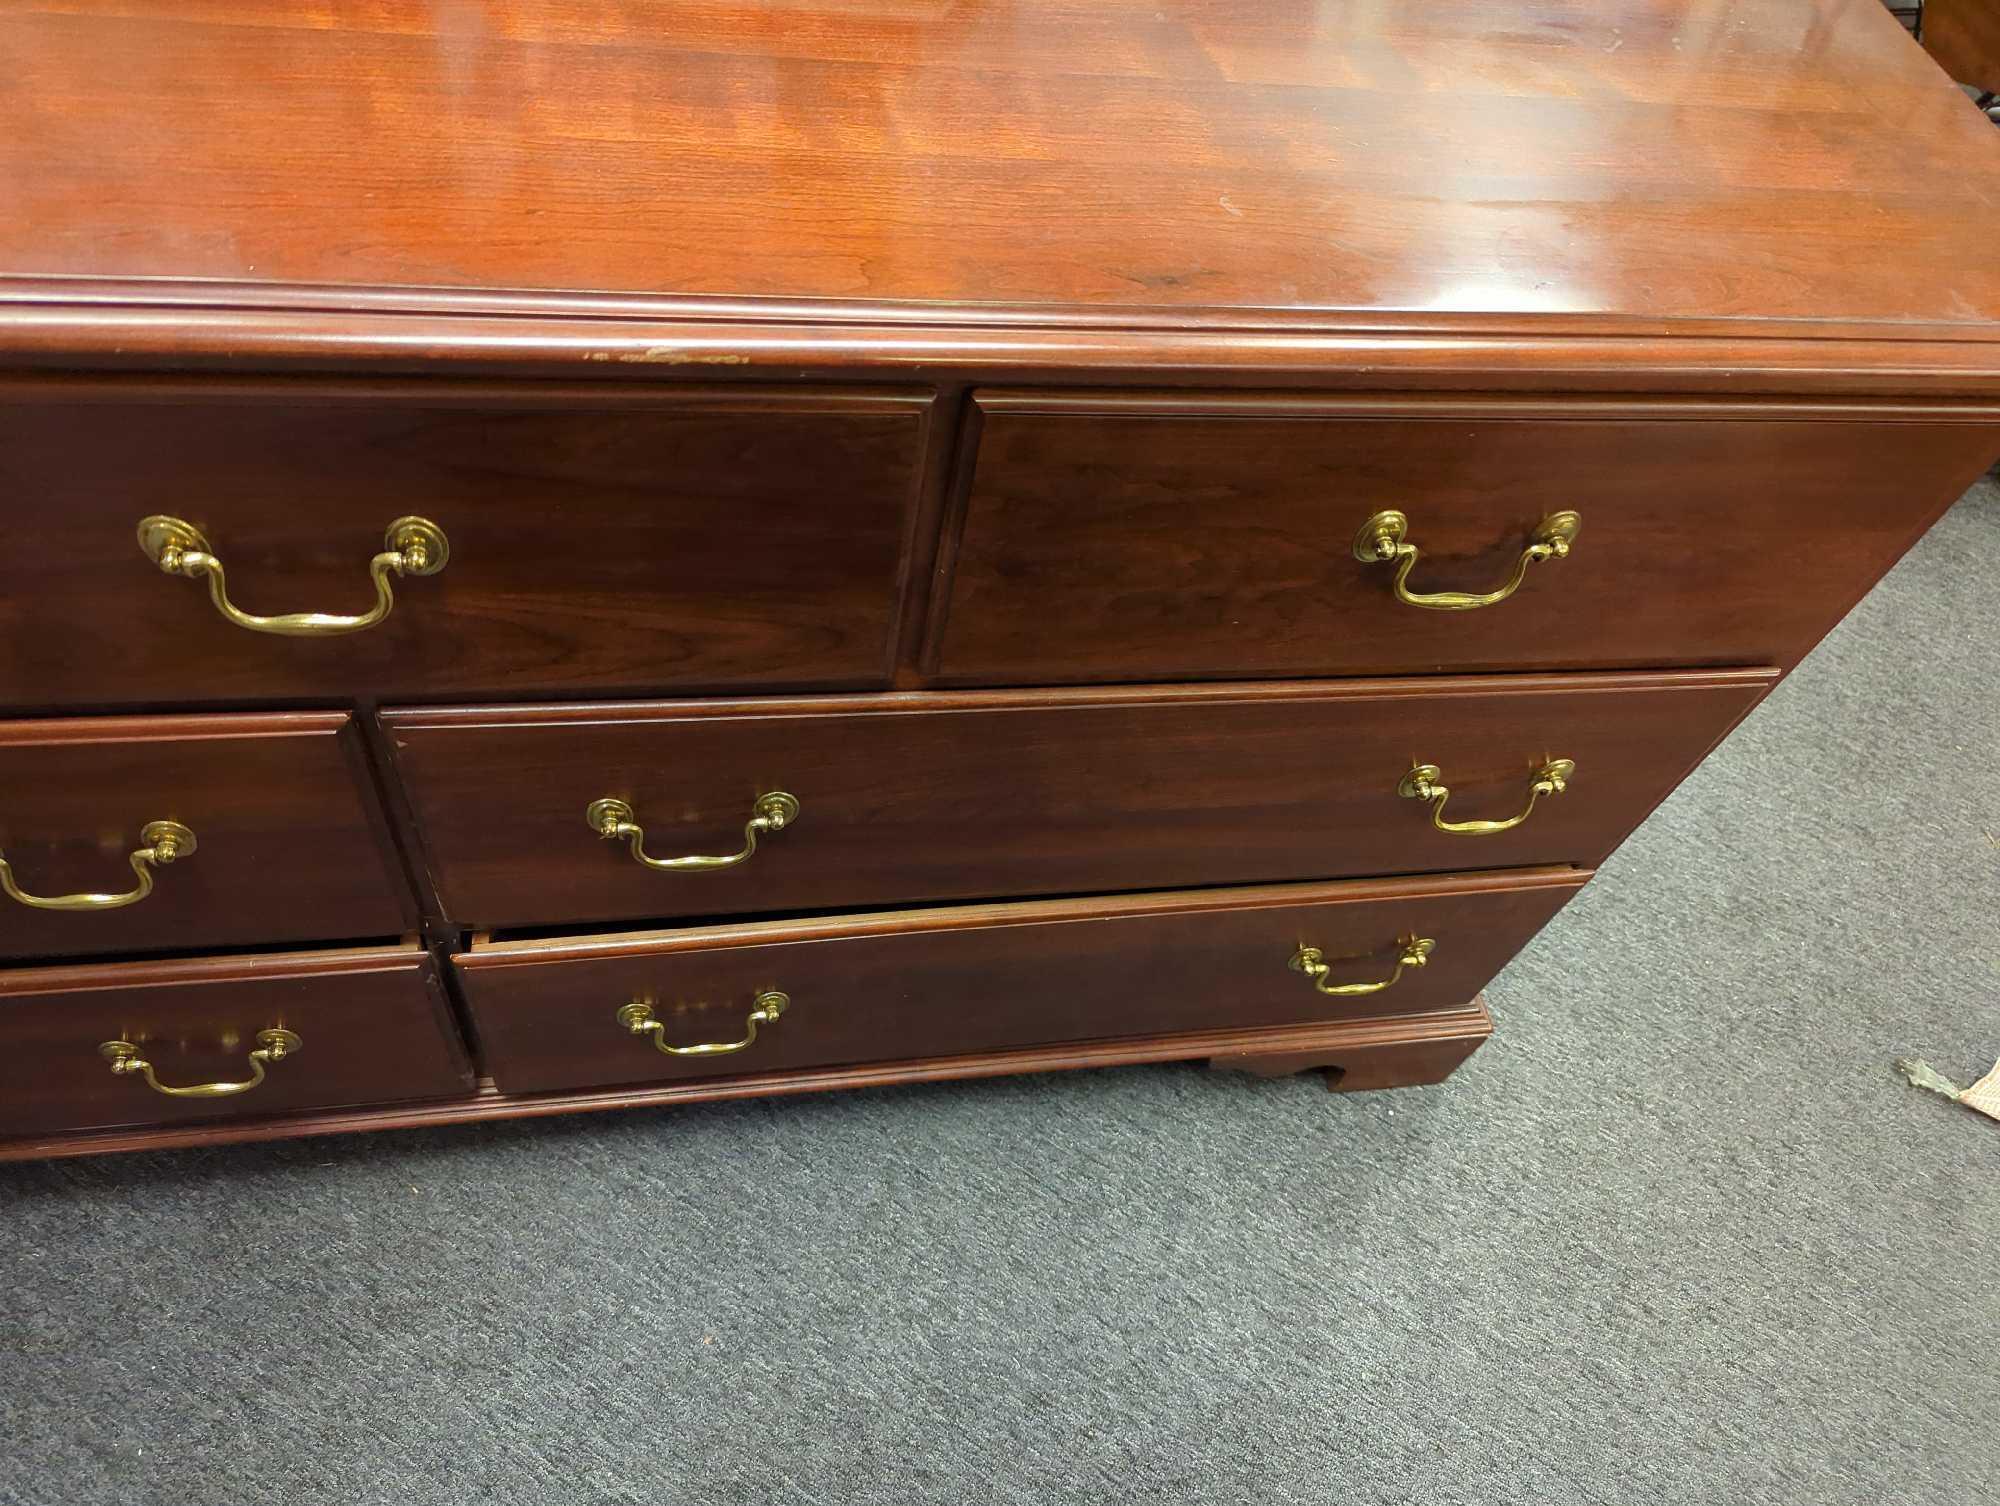 Knob Creek 7 Drawer Cherry Wood Dresser With Brass Style Pulls, Measure Approximately 64 in x 19 in